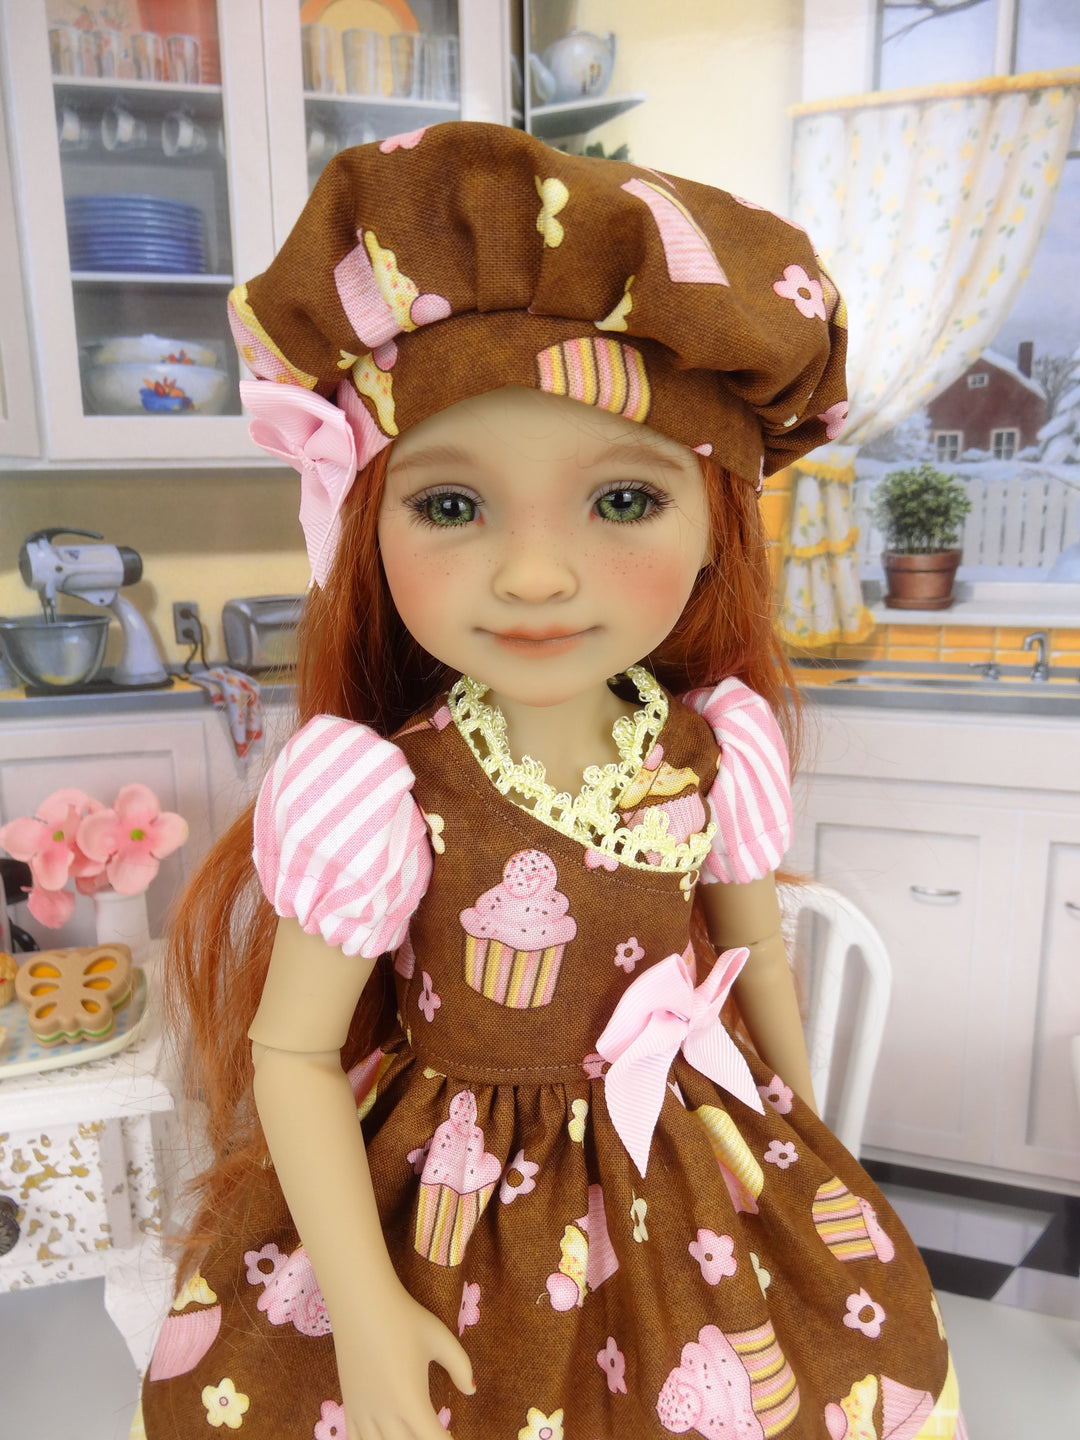 Cupcake Sweetie - dress with shoes for Ruby Red Fashion Friends doll